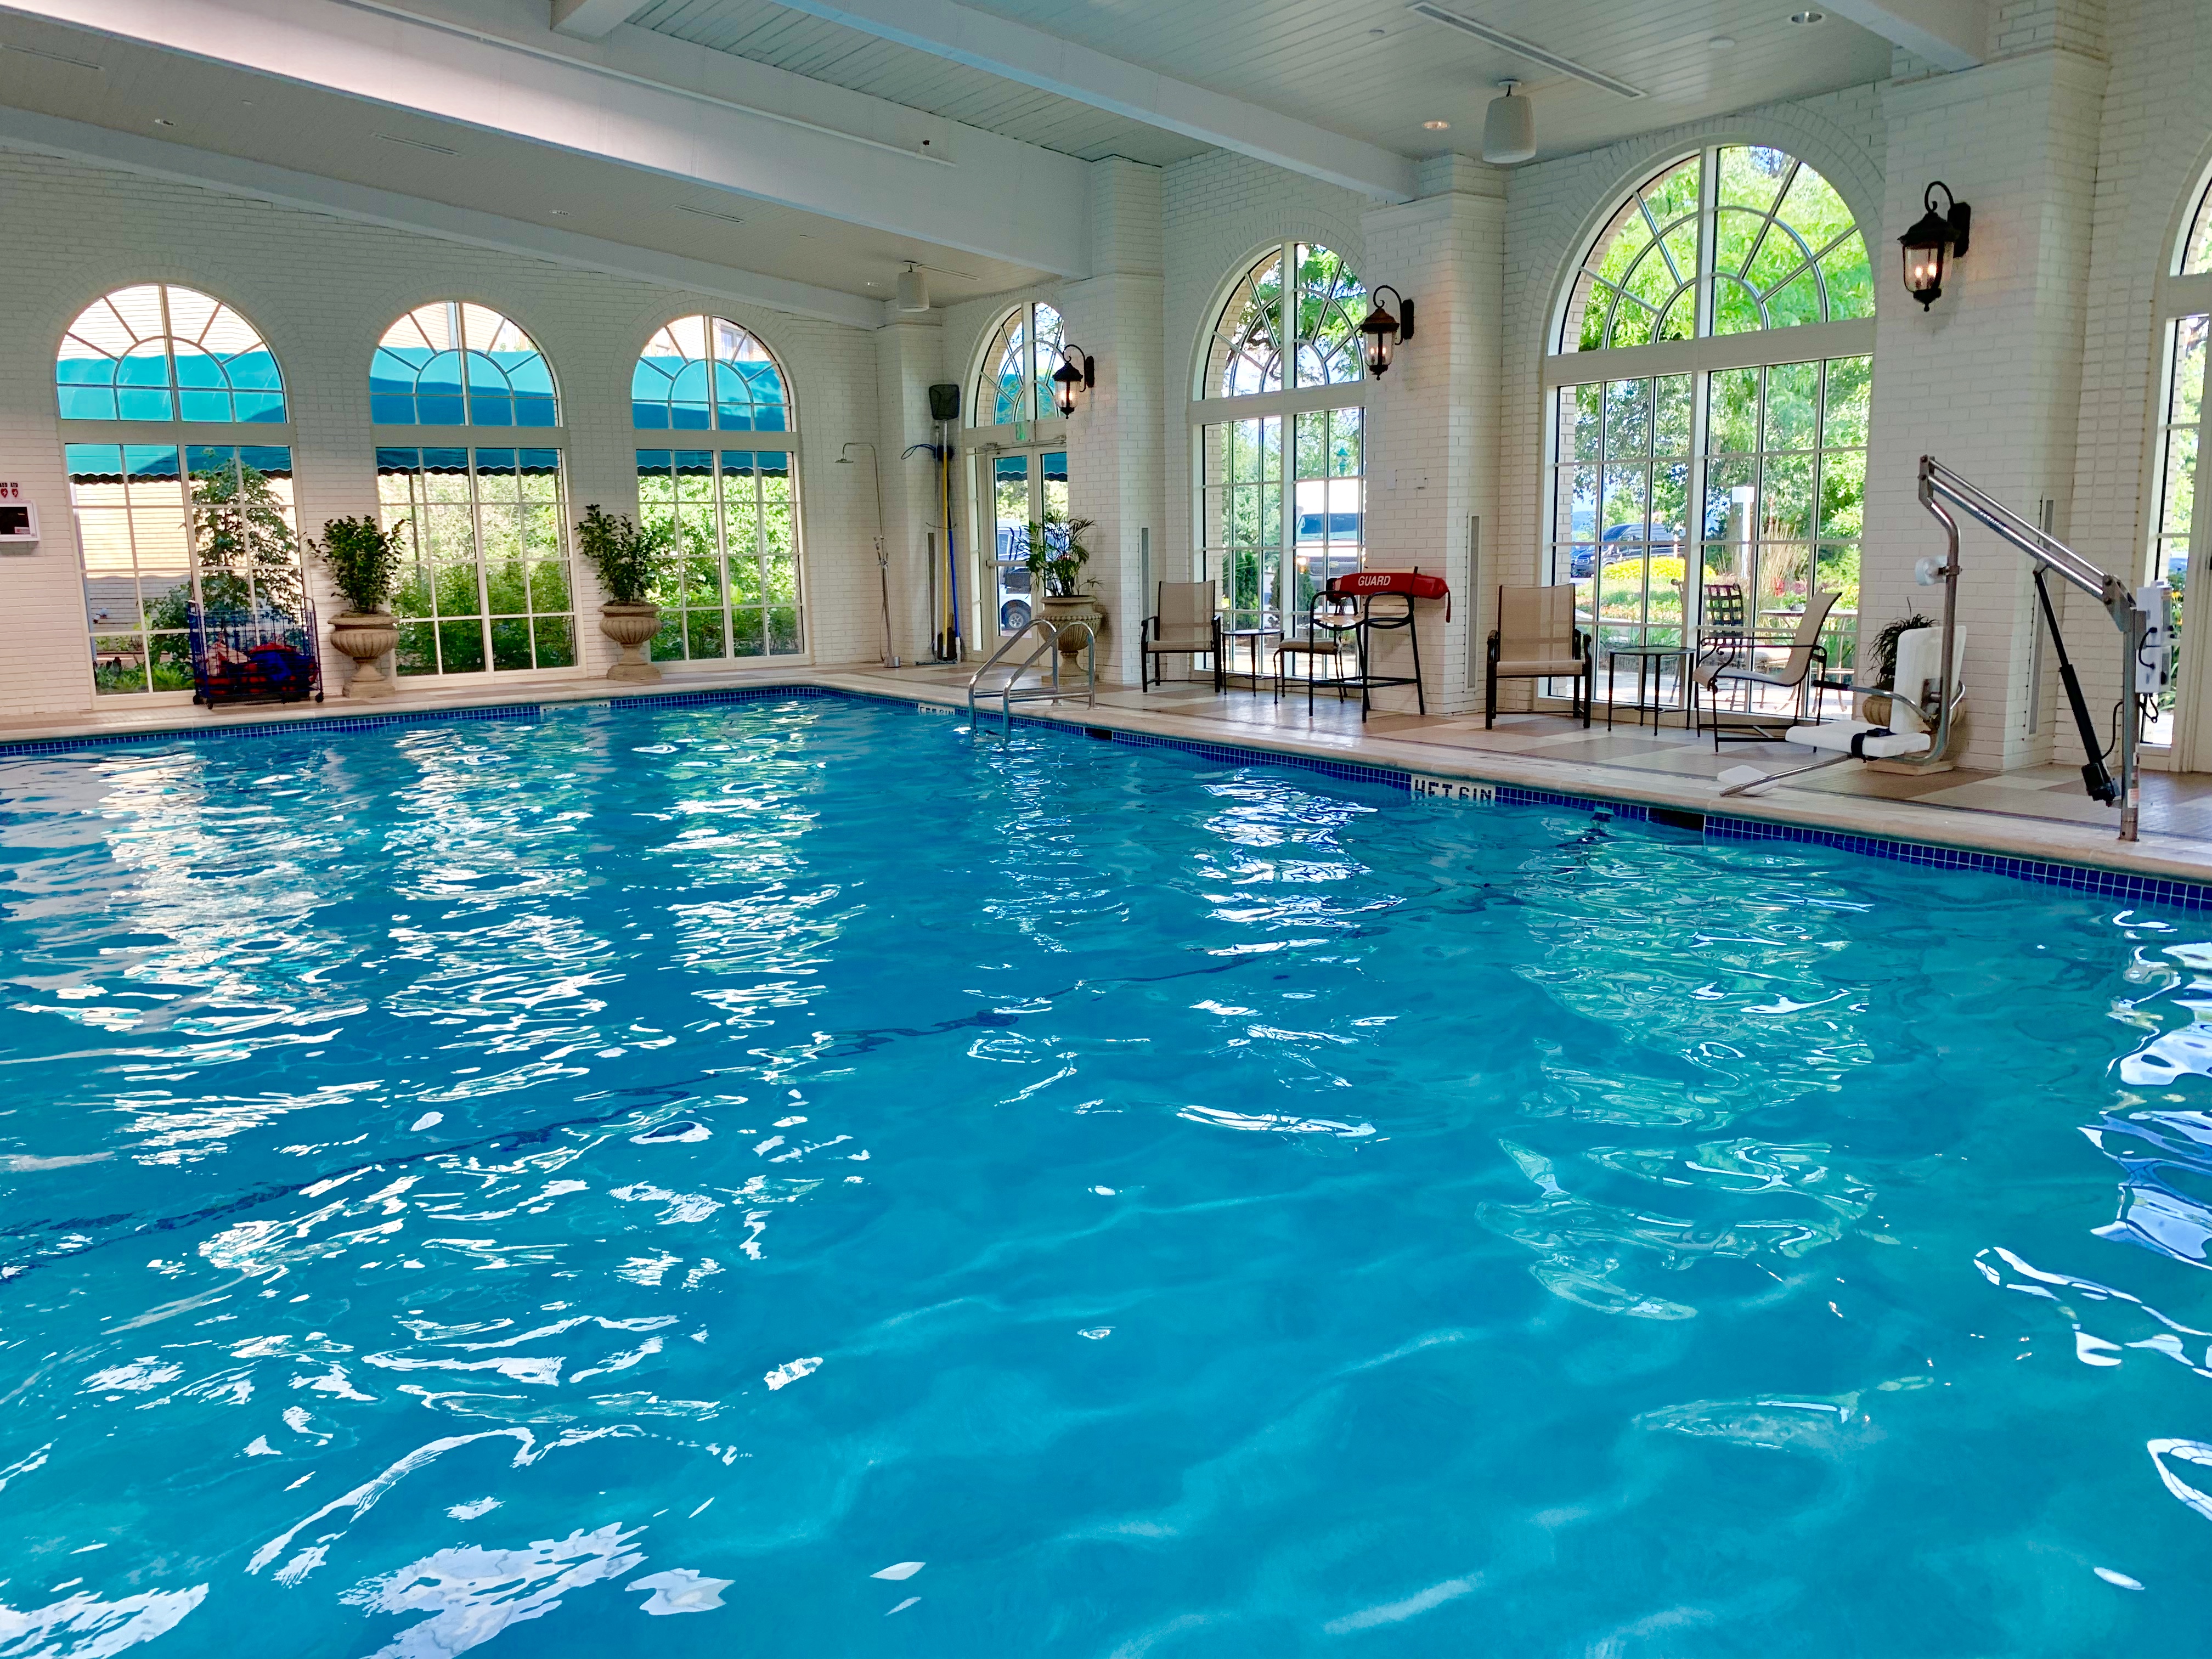 Hotel-Hershey-Indoor-Pool - Been There Done That with Kids
